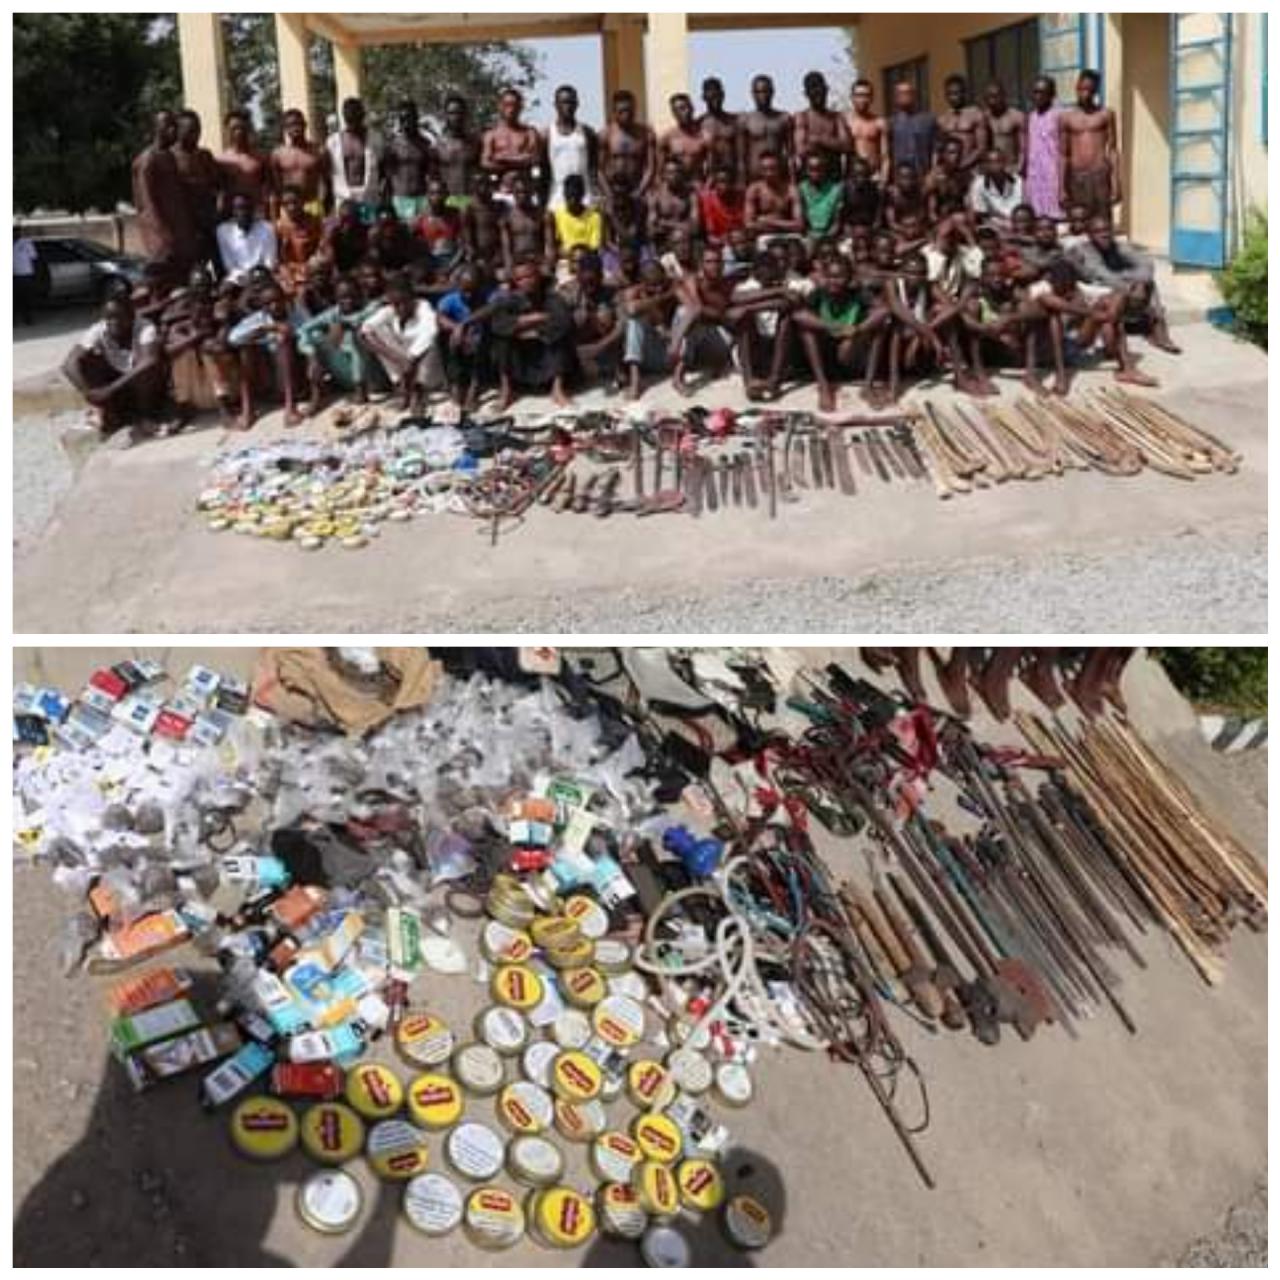 77 suspected miscreants arrested with dangerous weapons and illicit drugs in Minna